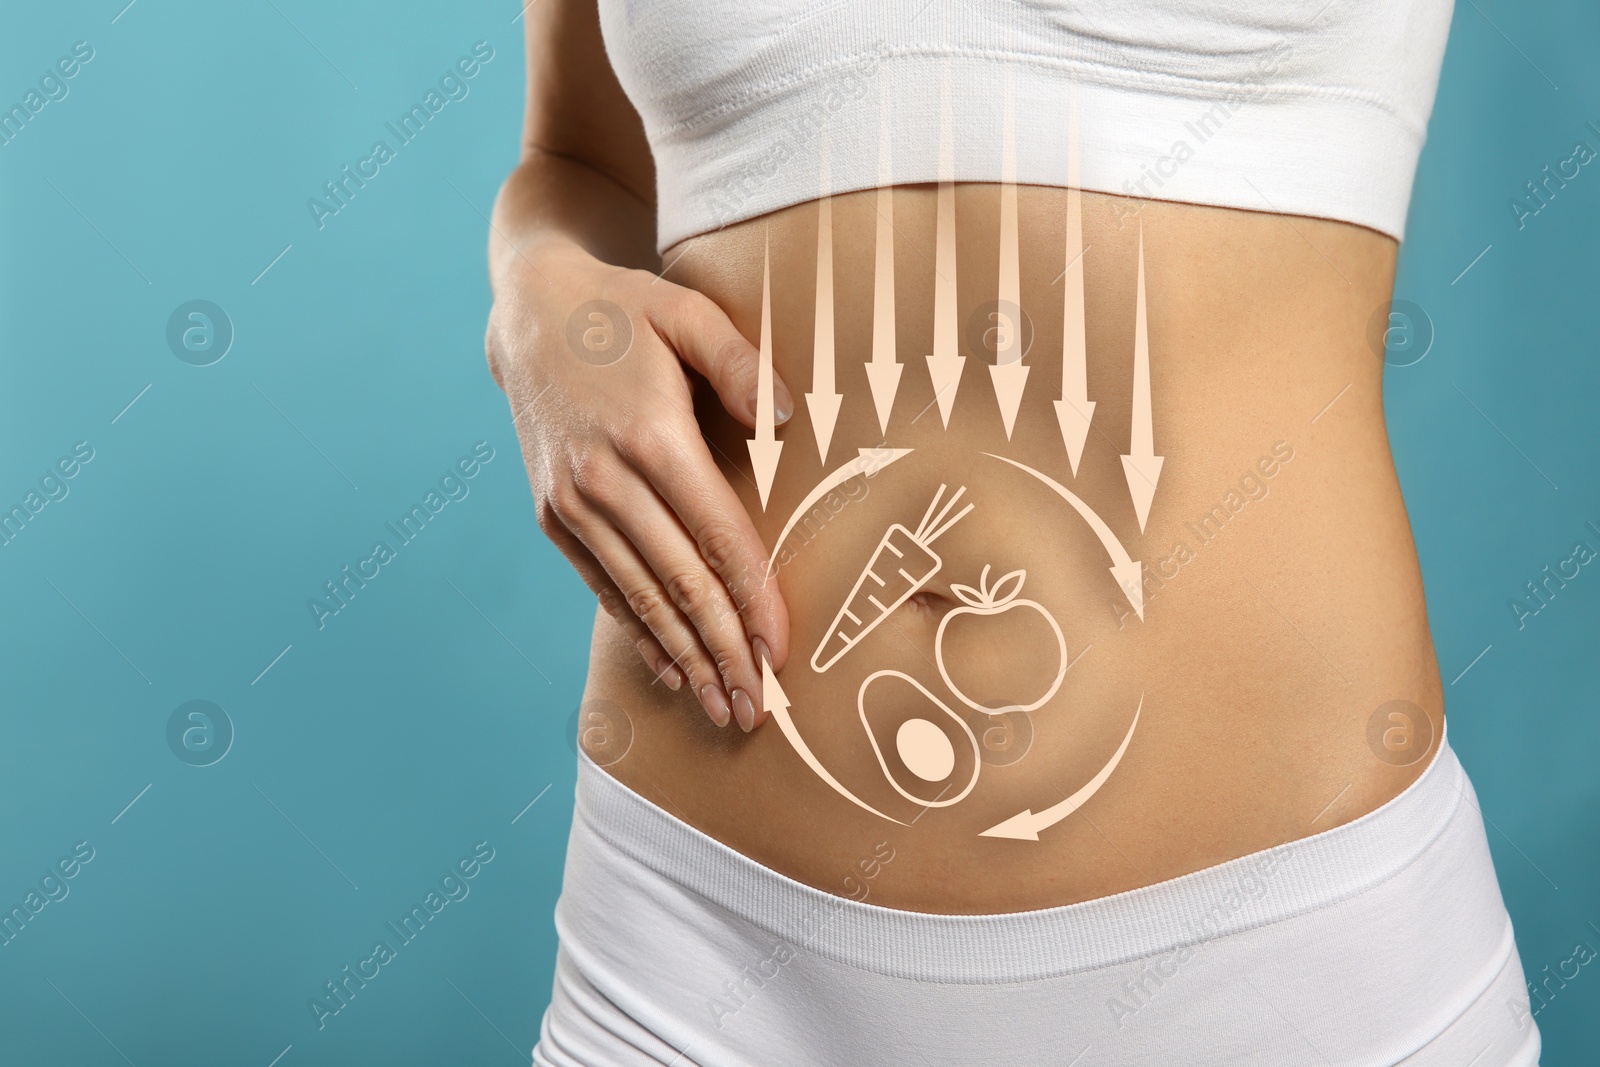 Image of Healthy digestion. Woman touching her belly against light blue background, closeup. Illustration of arrows and different products on her body